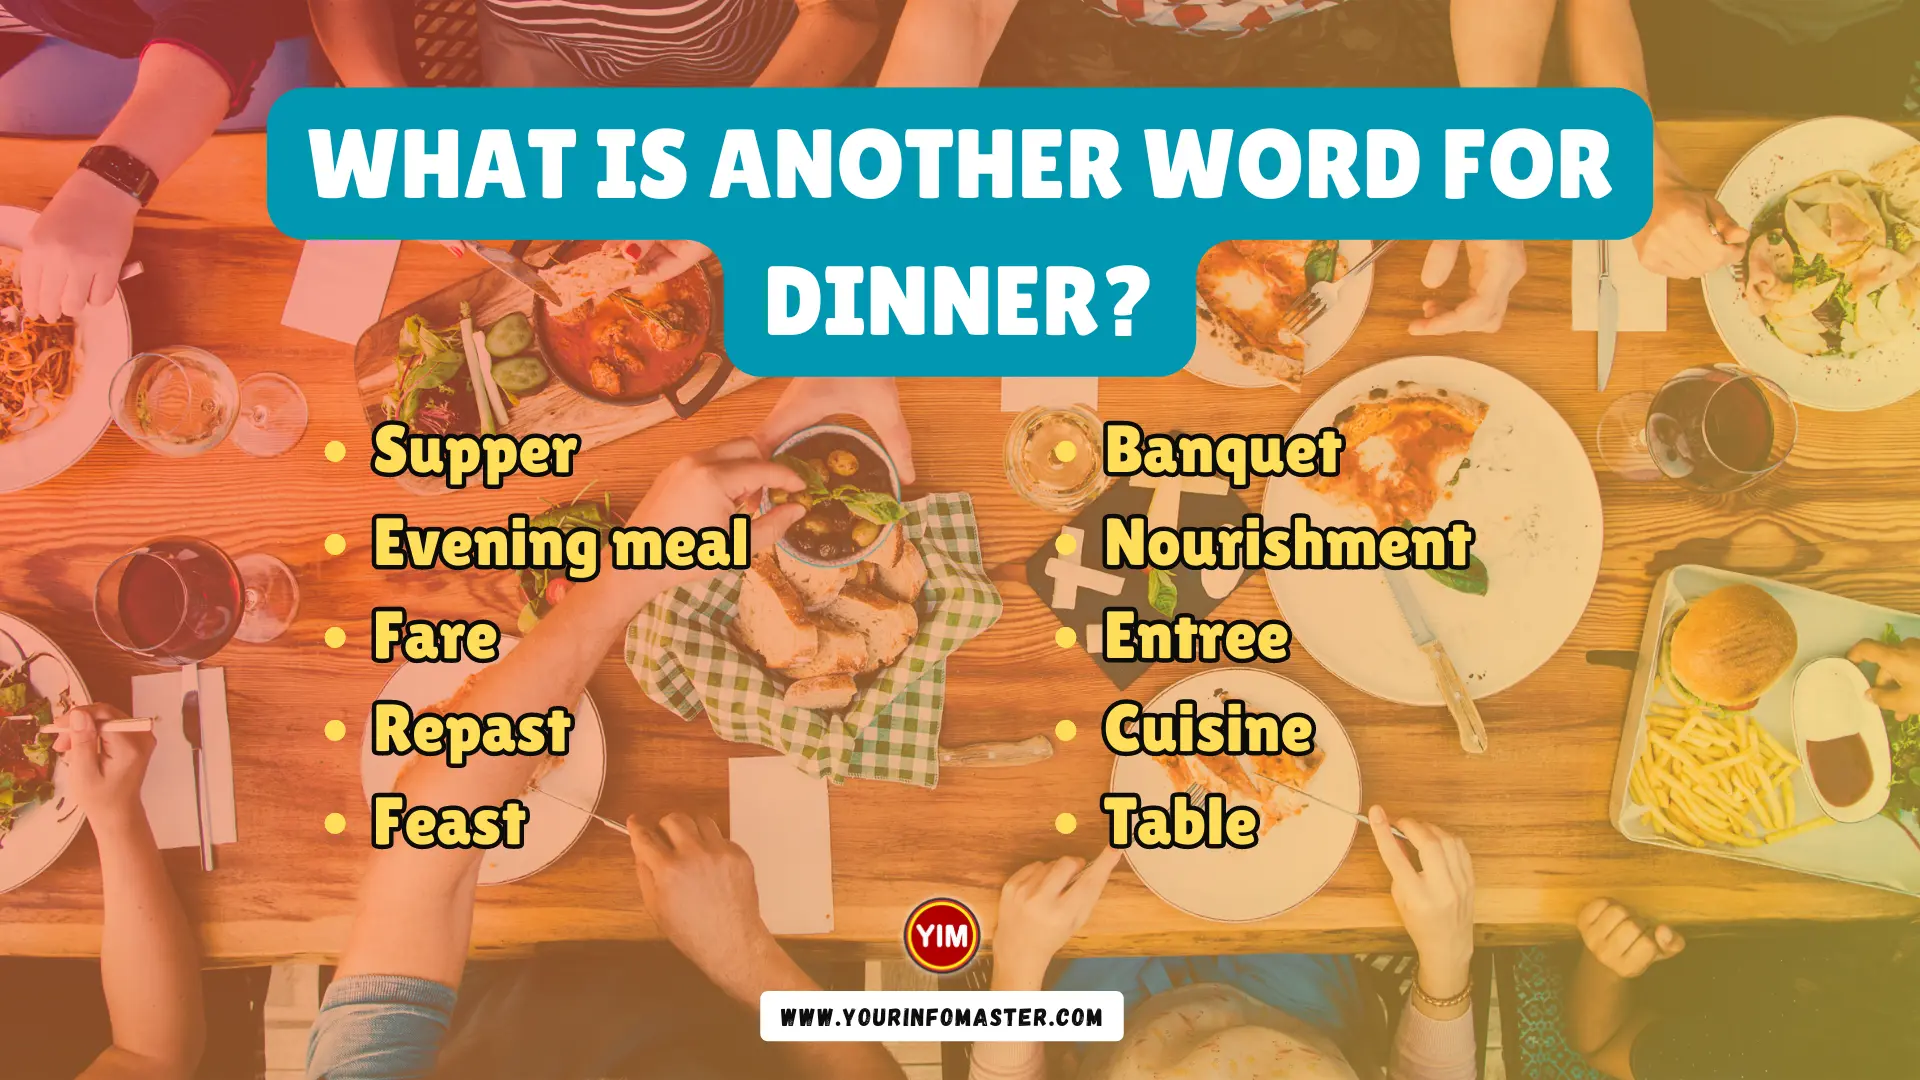 What is another word for Dinner